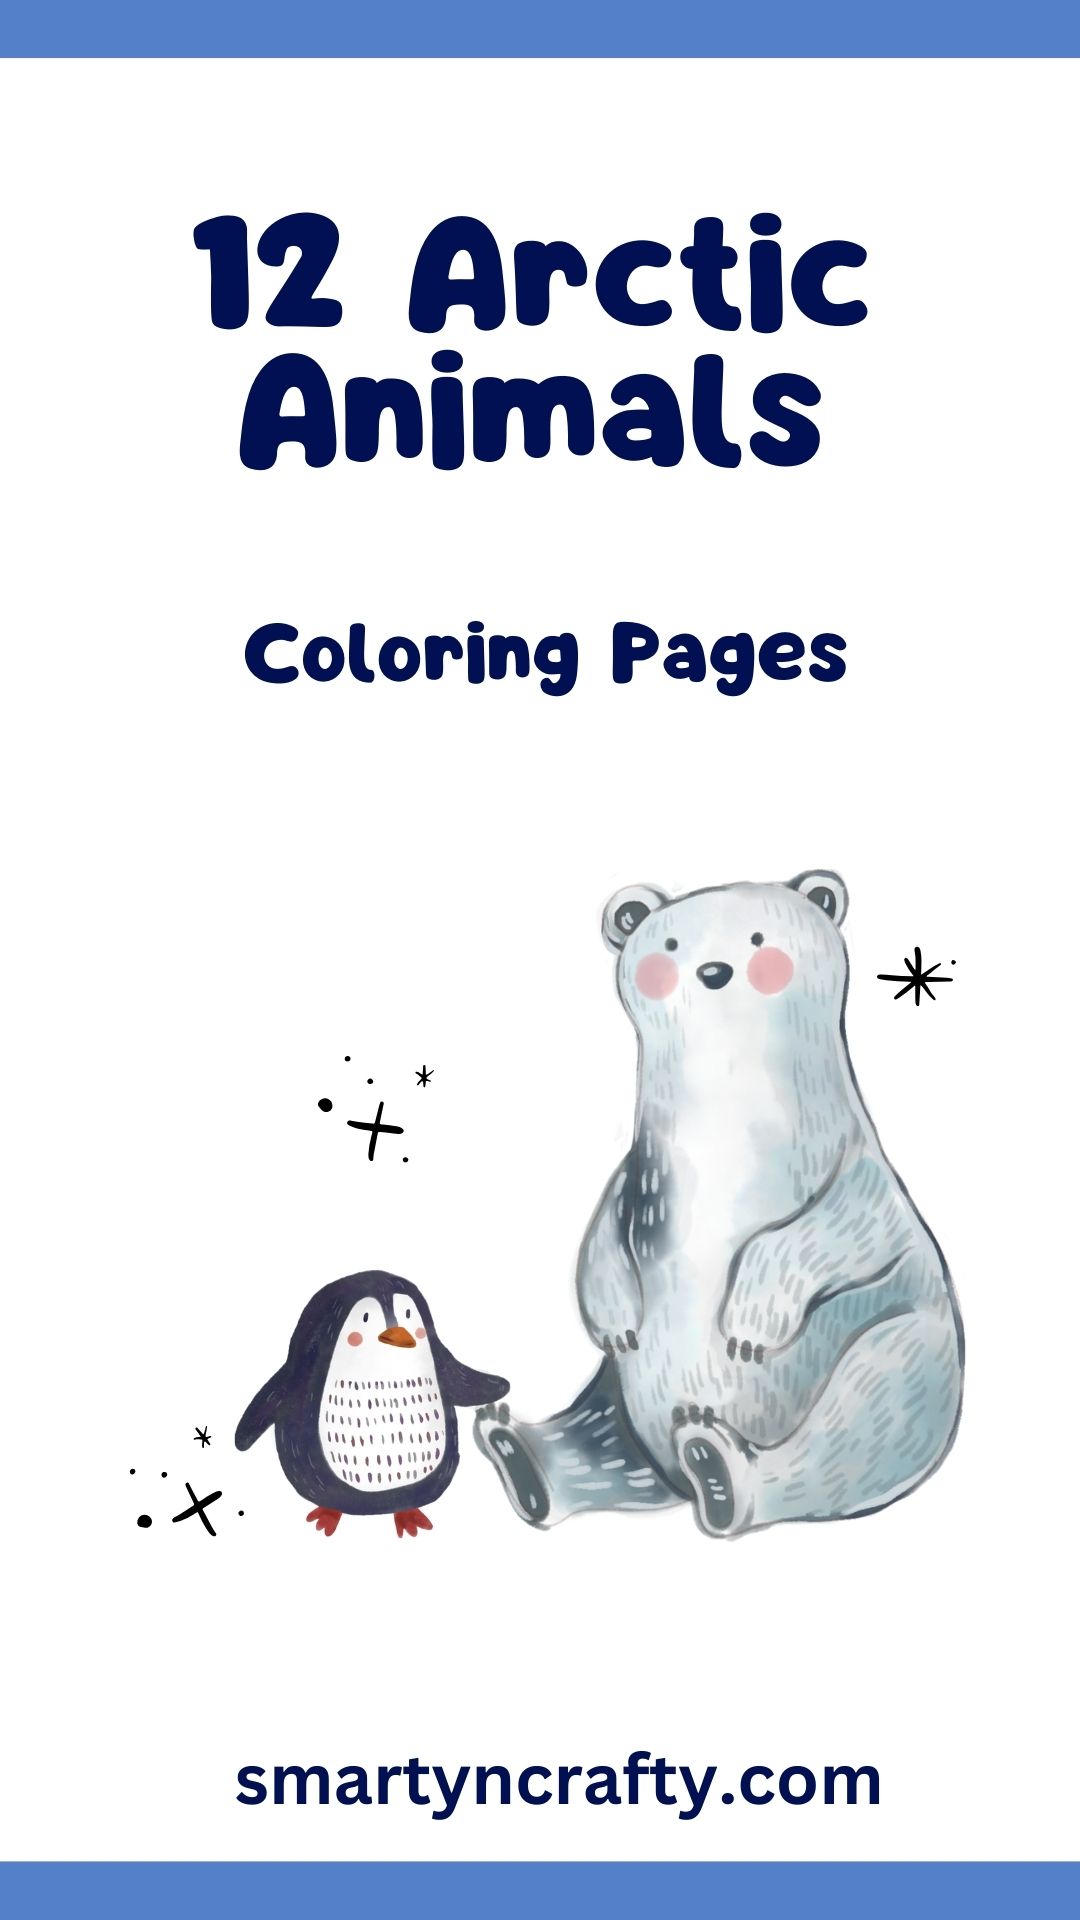 arctic animals coloring pages